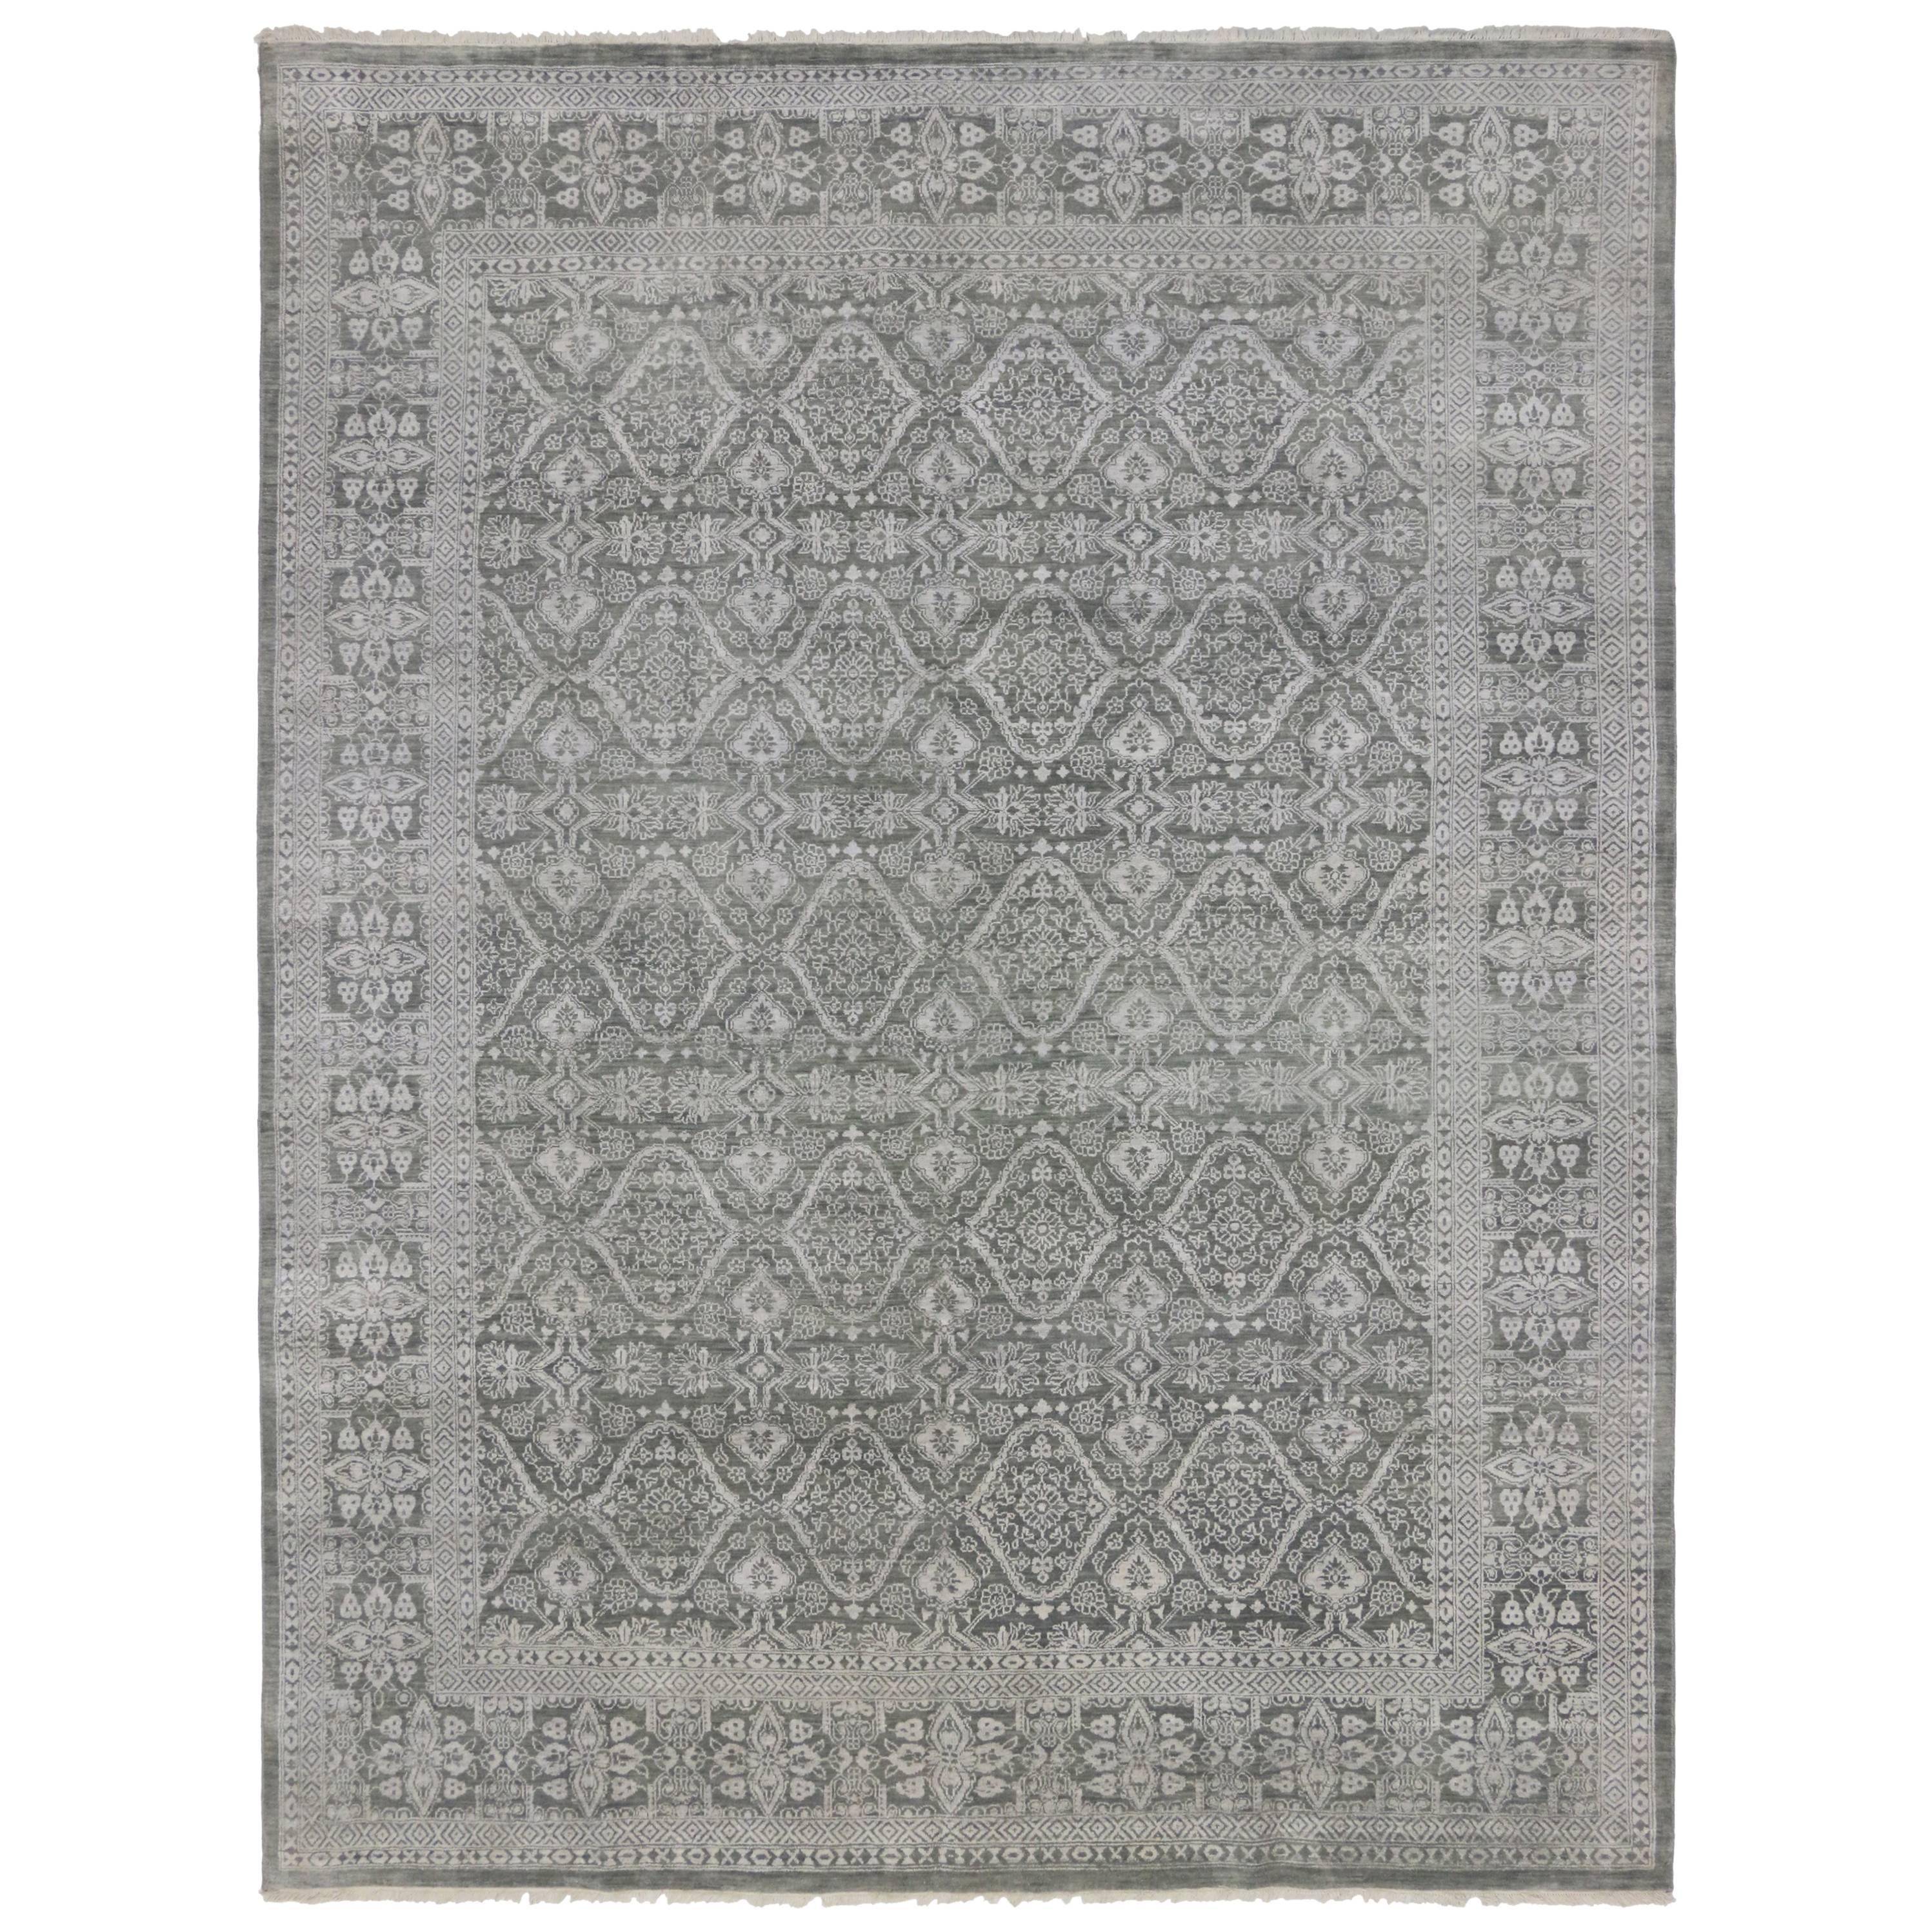 New Transitional Gray Area Rug with Modern Style